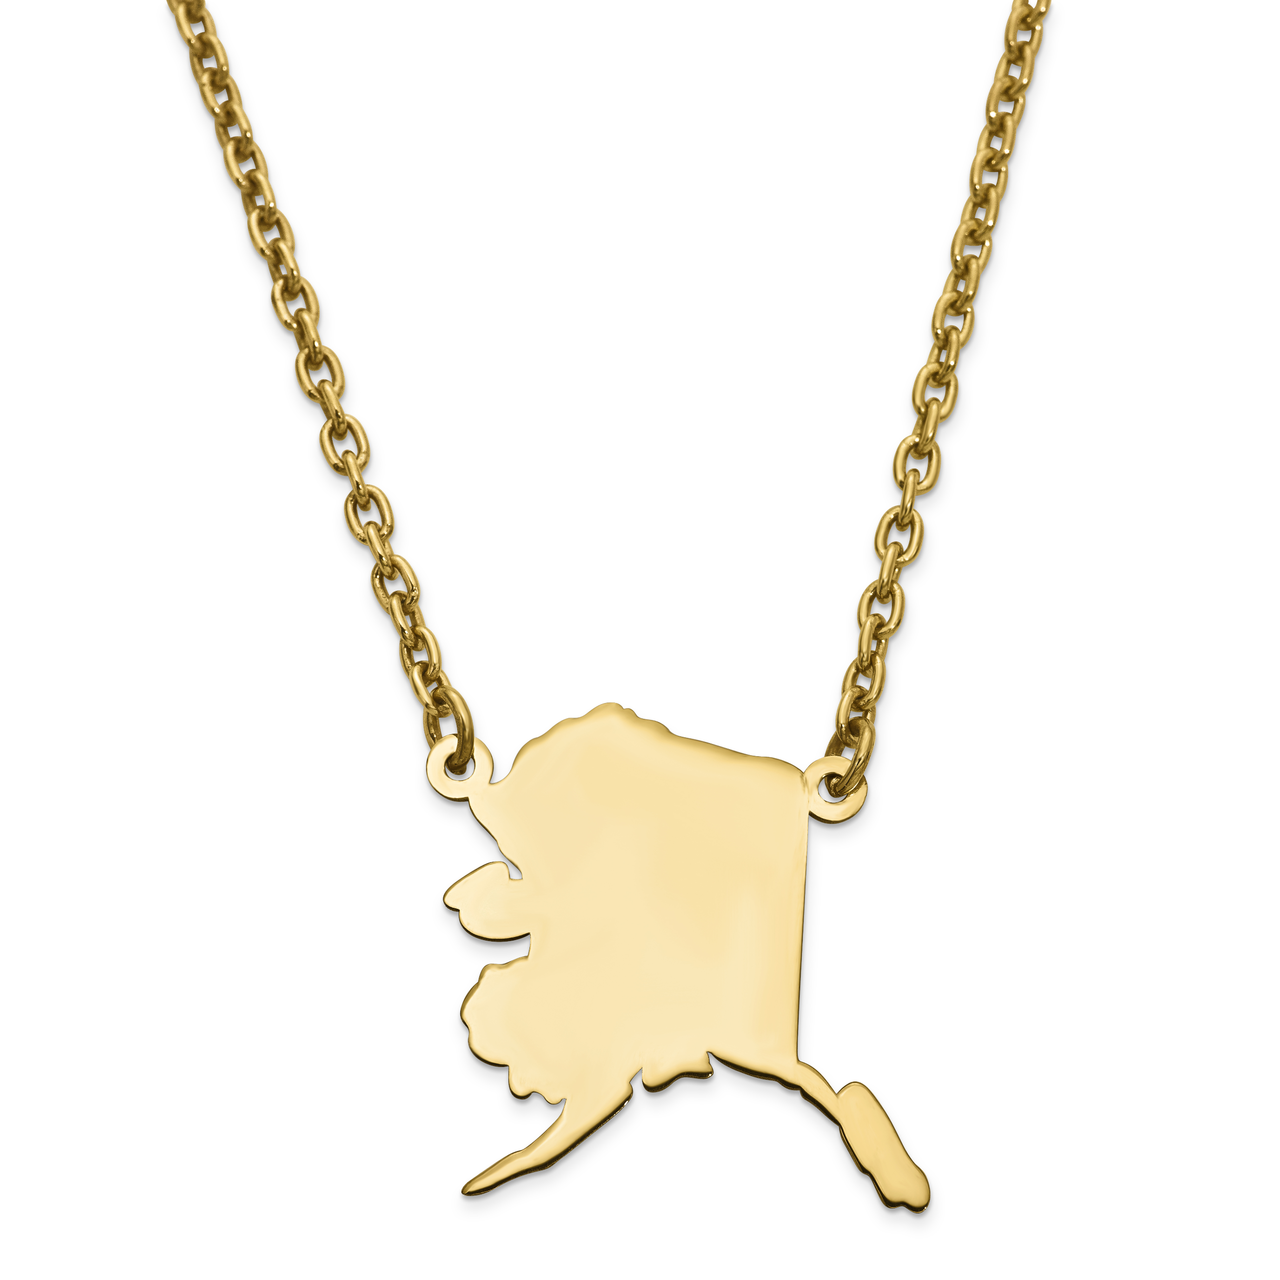 Alaska State Pendant Necklace with Chain 14k Yellow Gold Engravable XNA706Y-AK